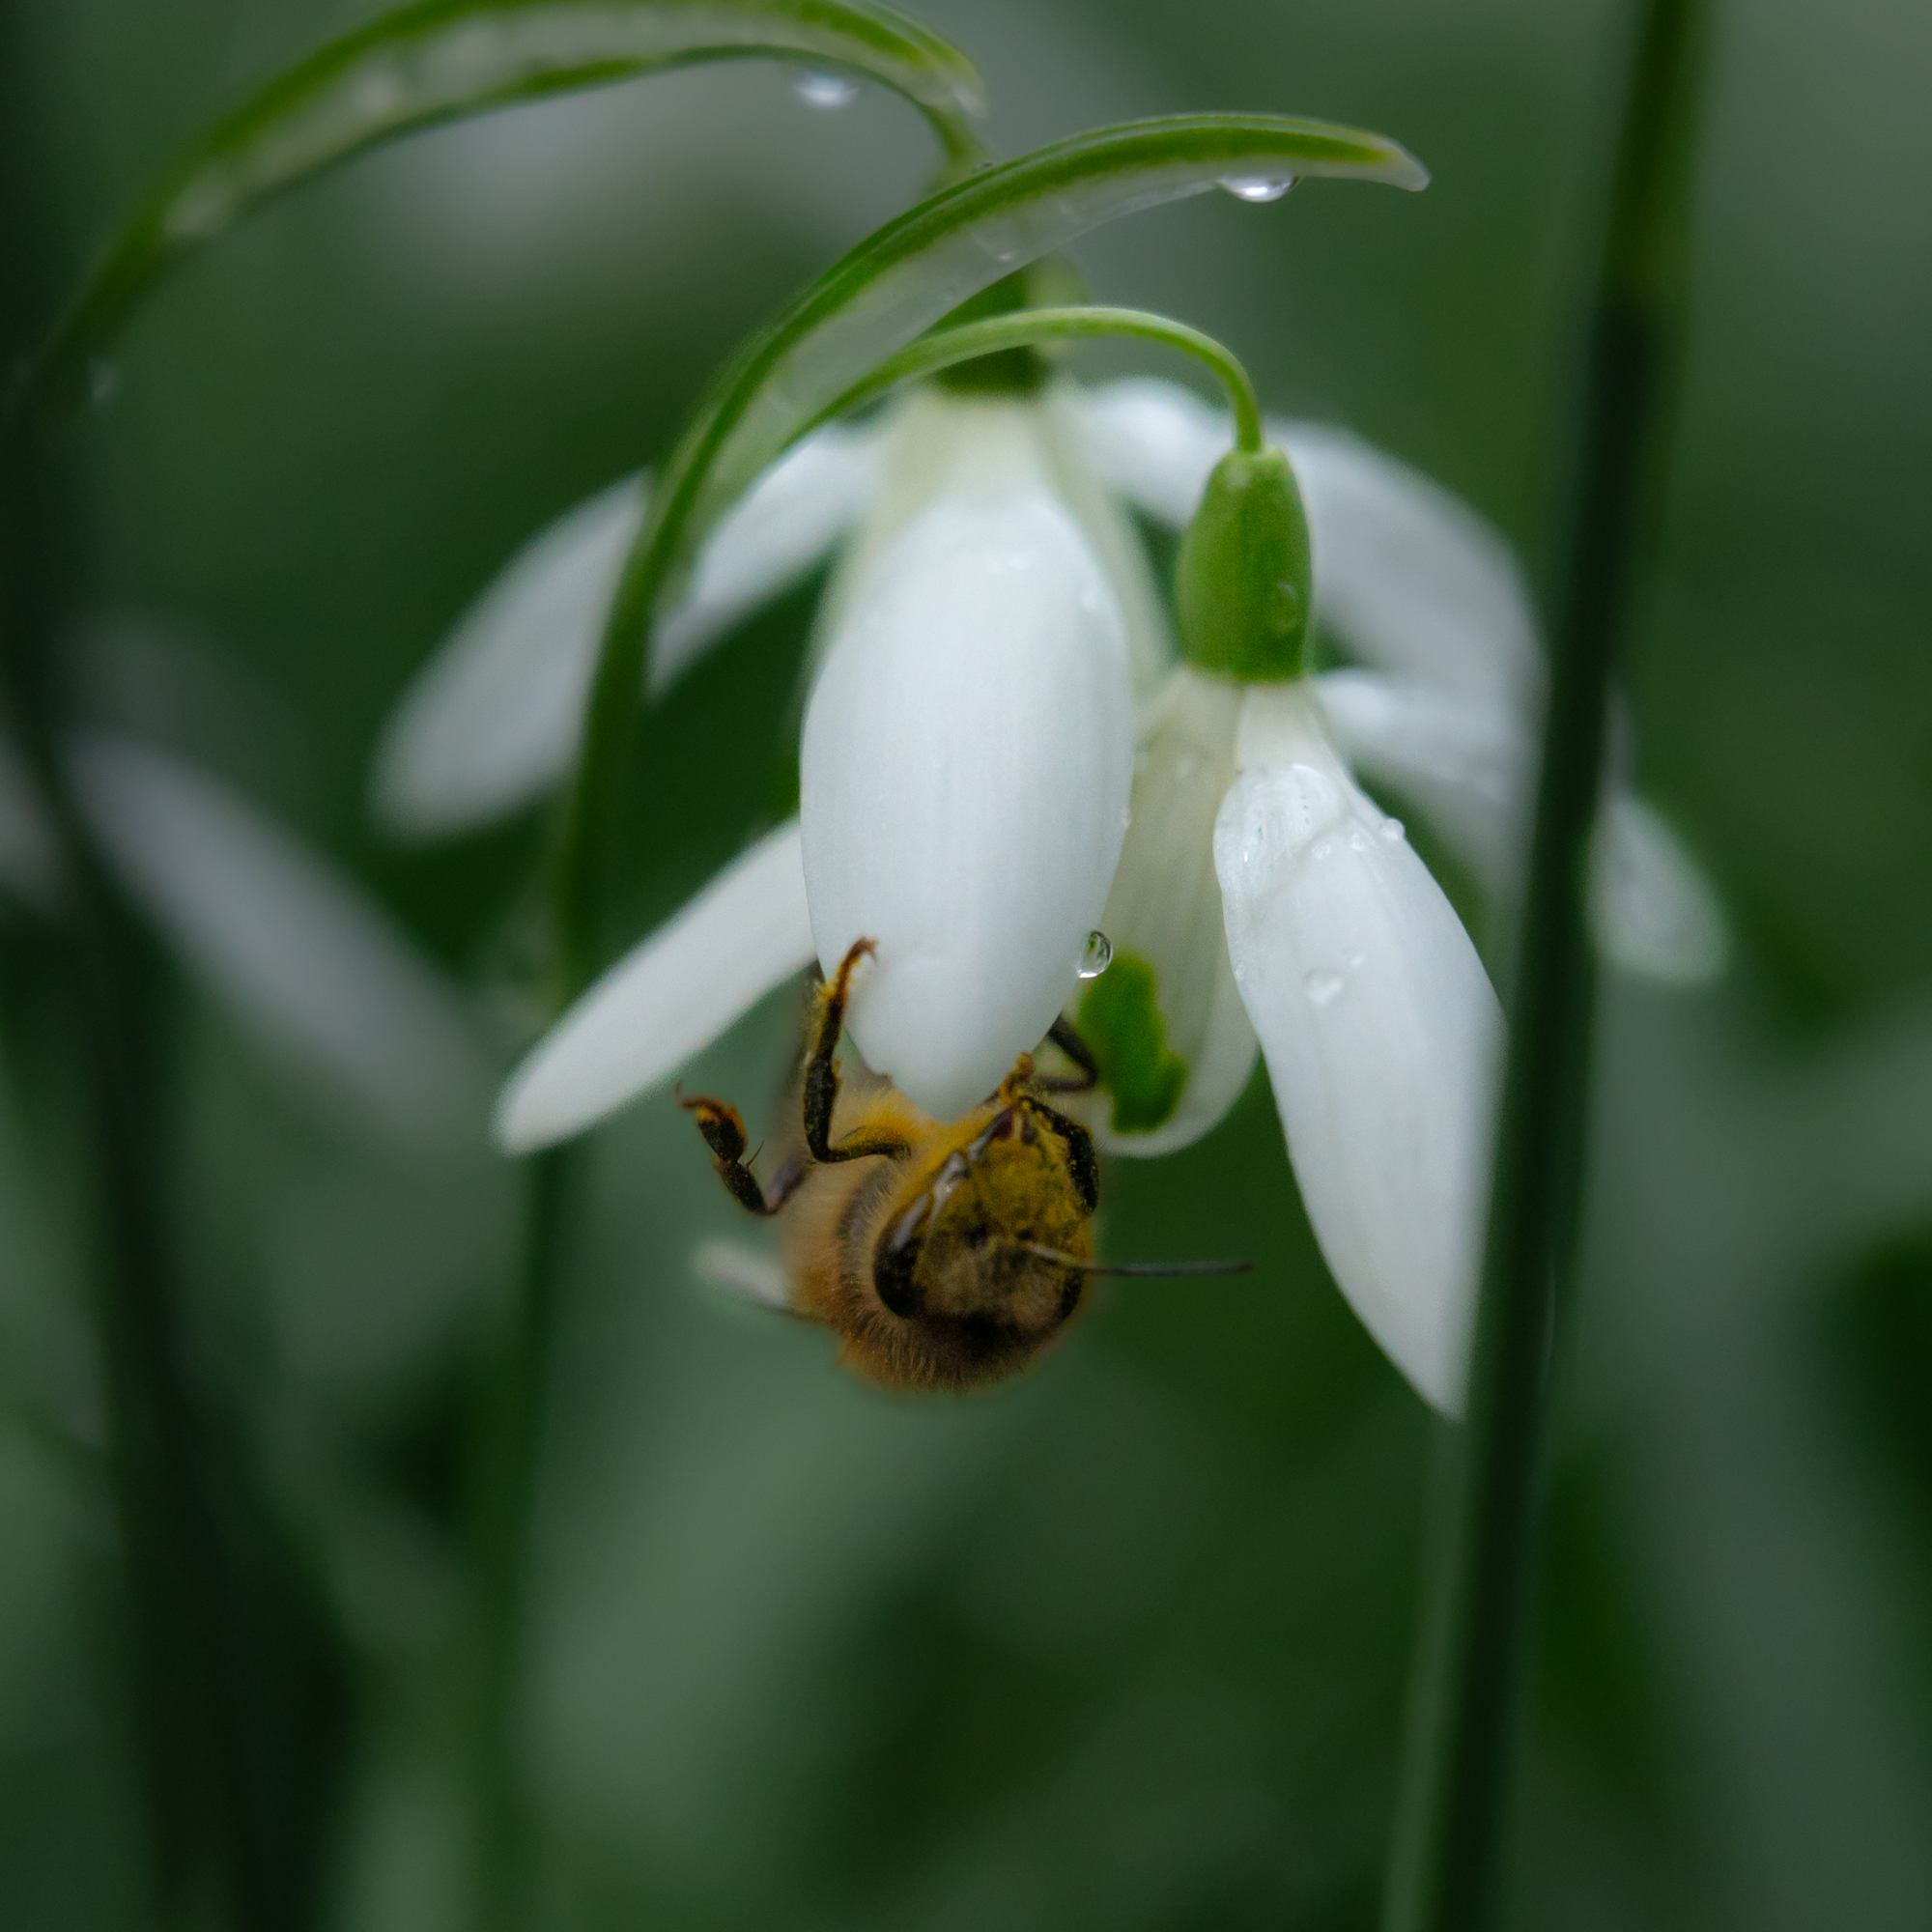 bee on a snowdrop pollinating the flower